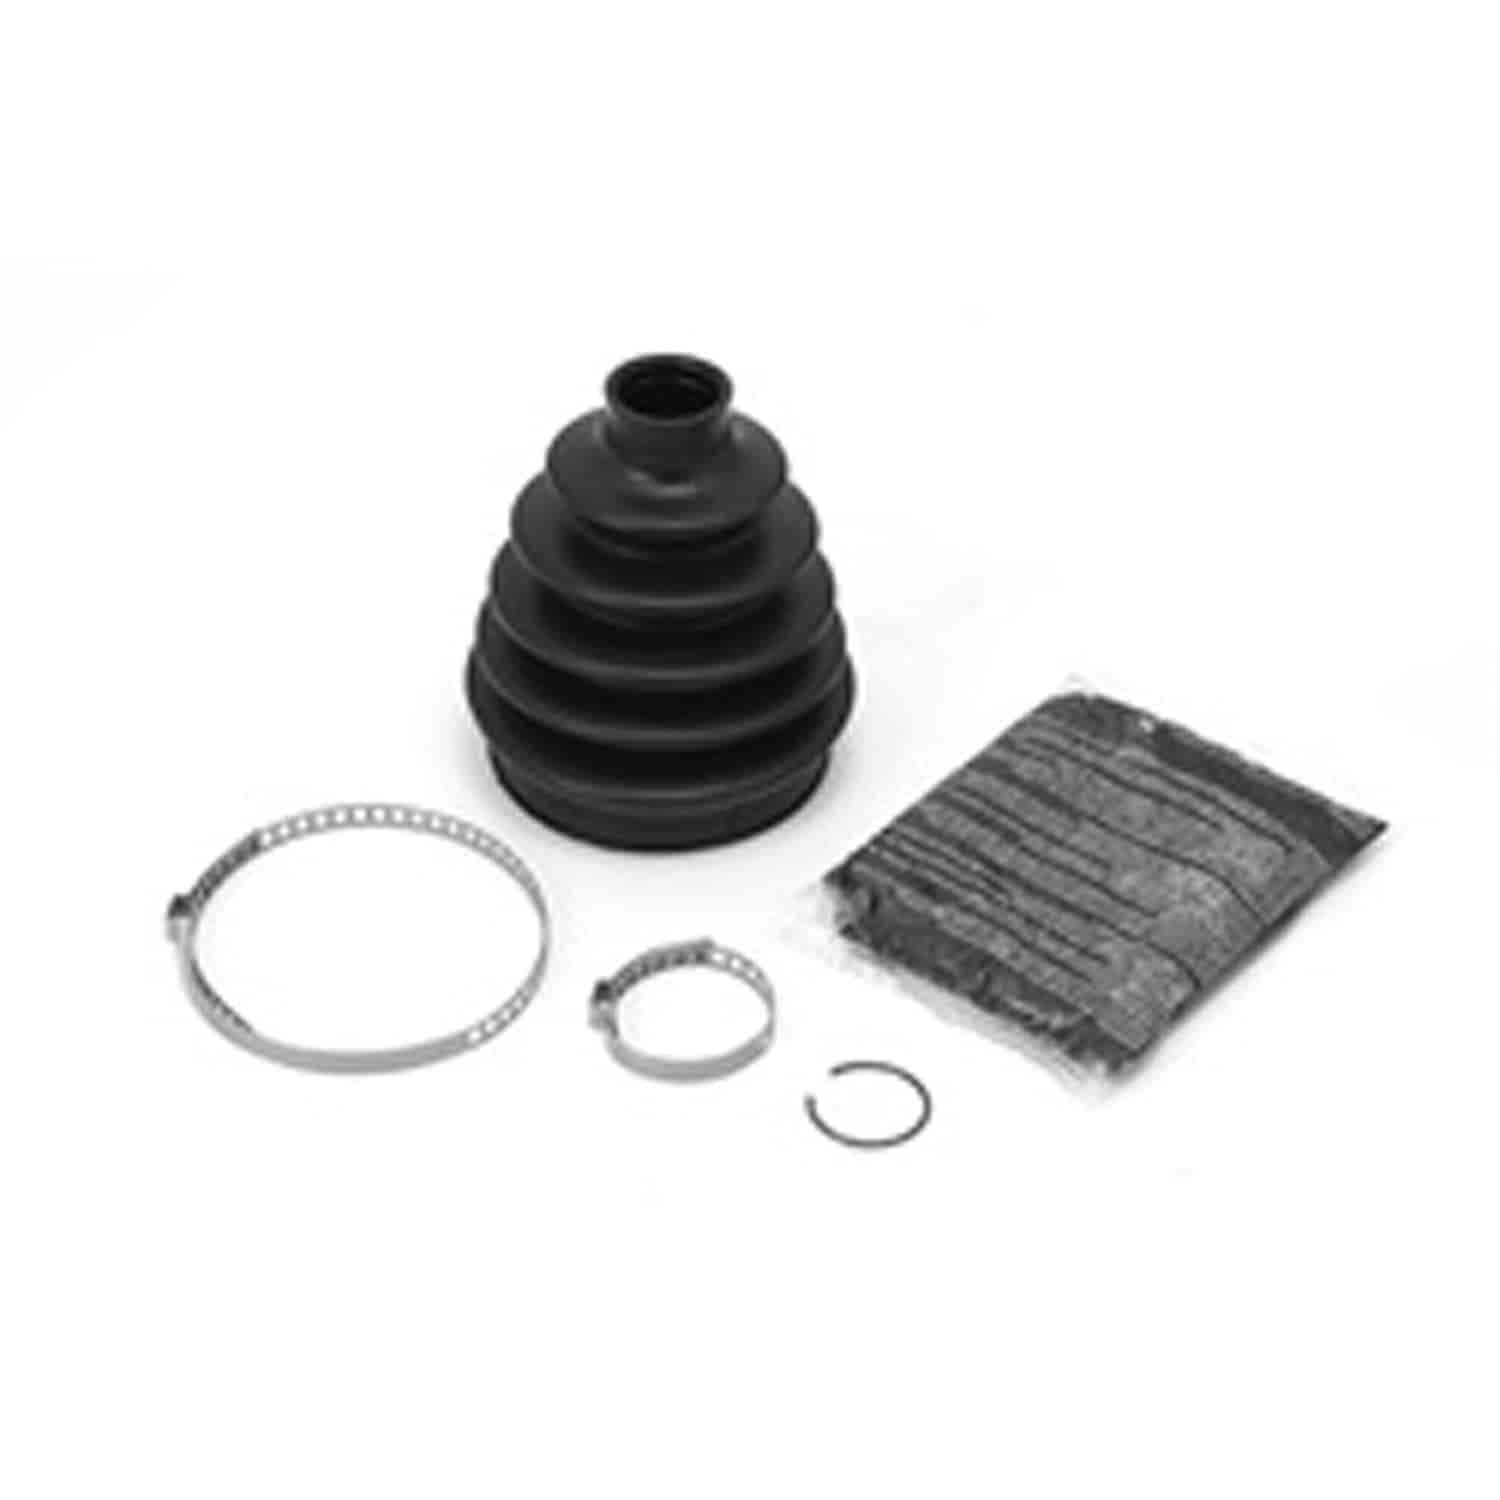 This front outer axle CV boot kit from Omix-ADA fits the left or right side of 05-10 Jeep Grand Cherokee WK .